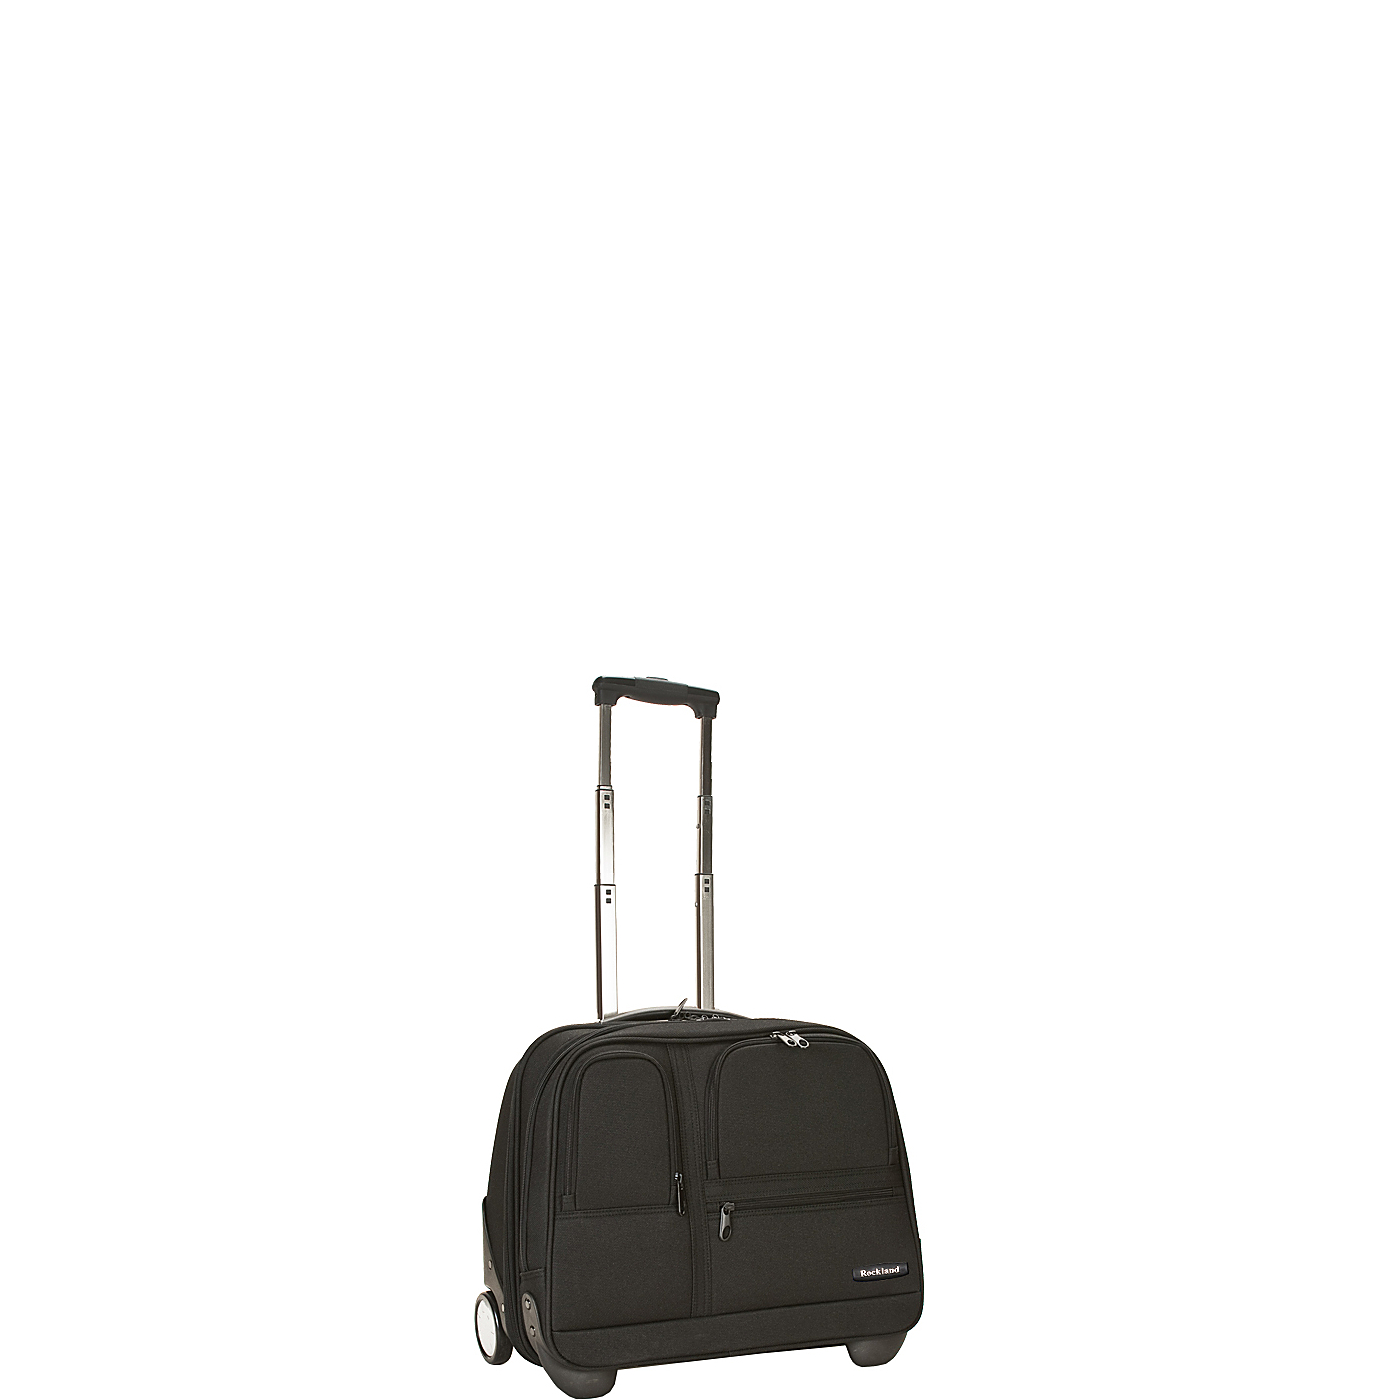 Rockland Luggage Executive Rolling Computer Case